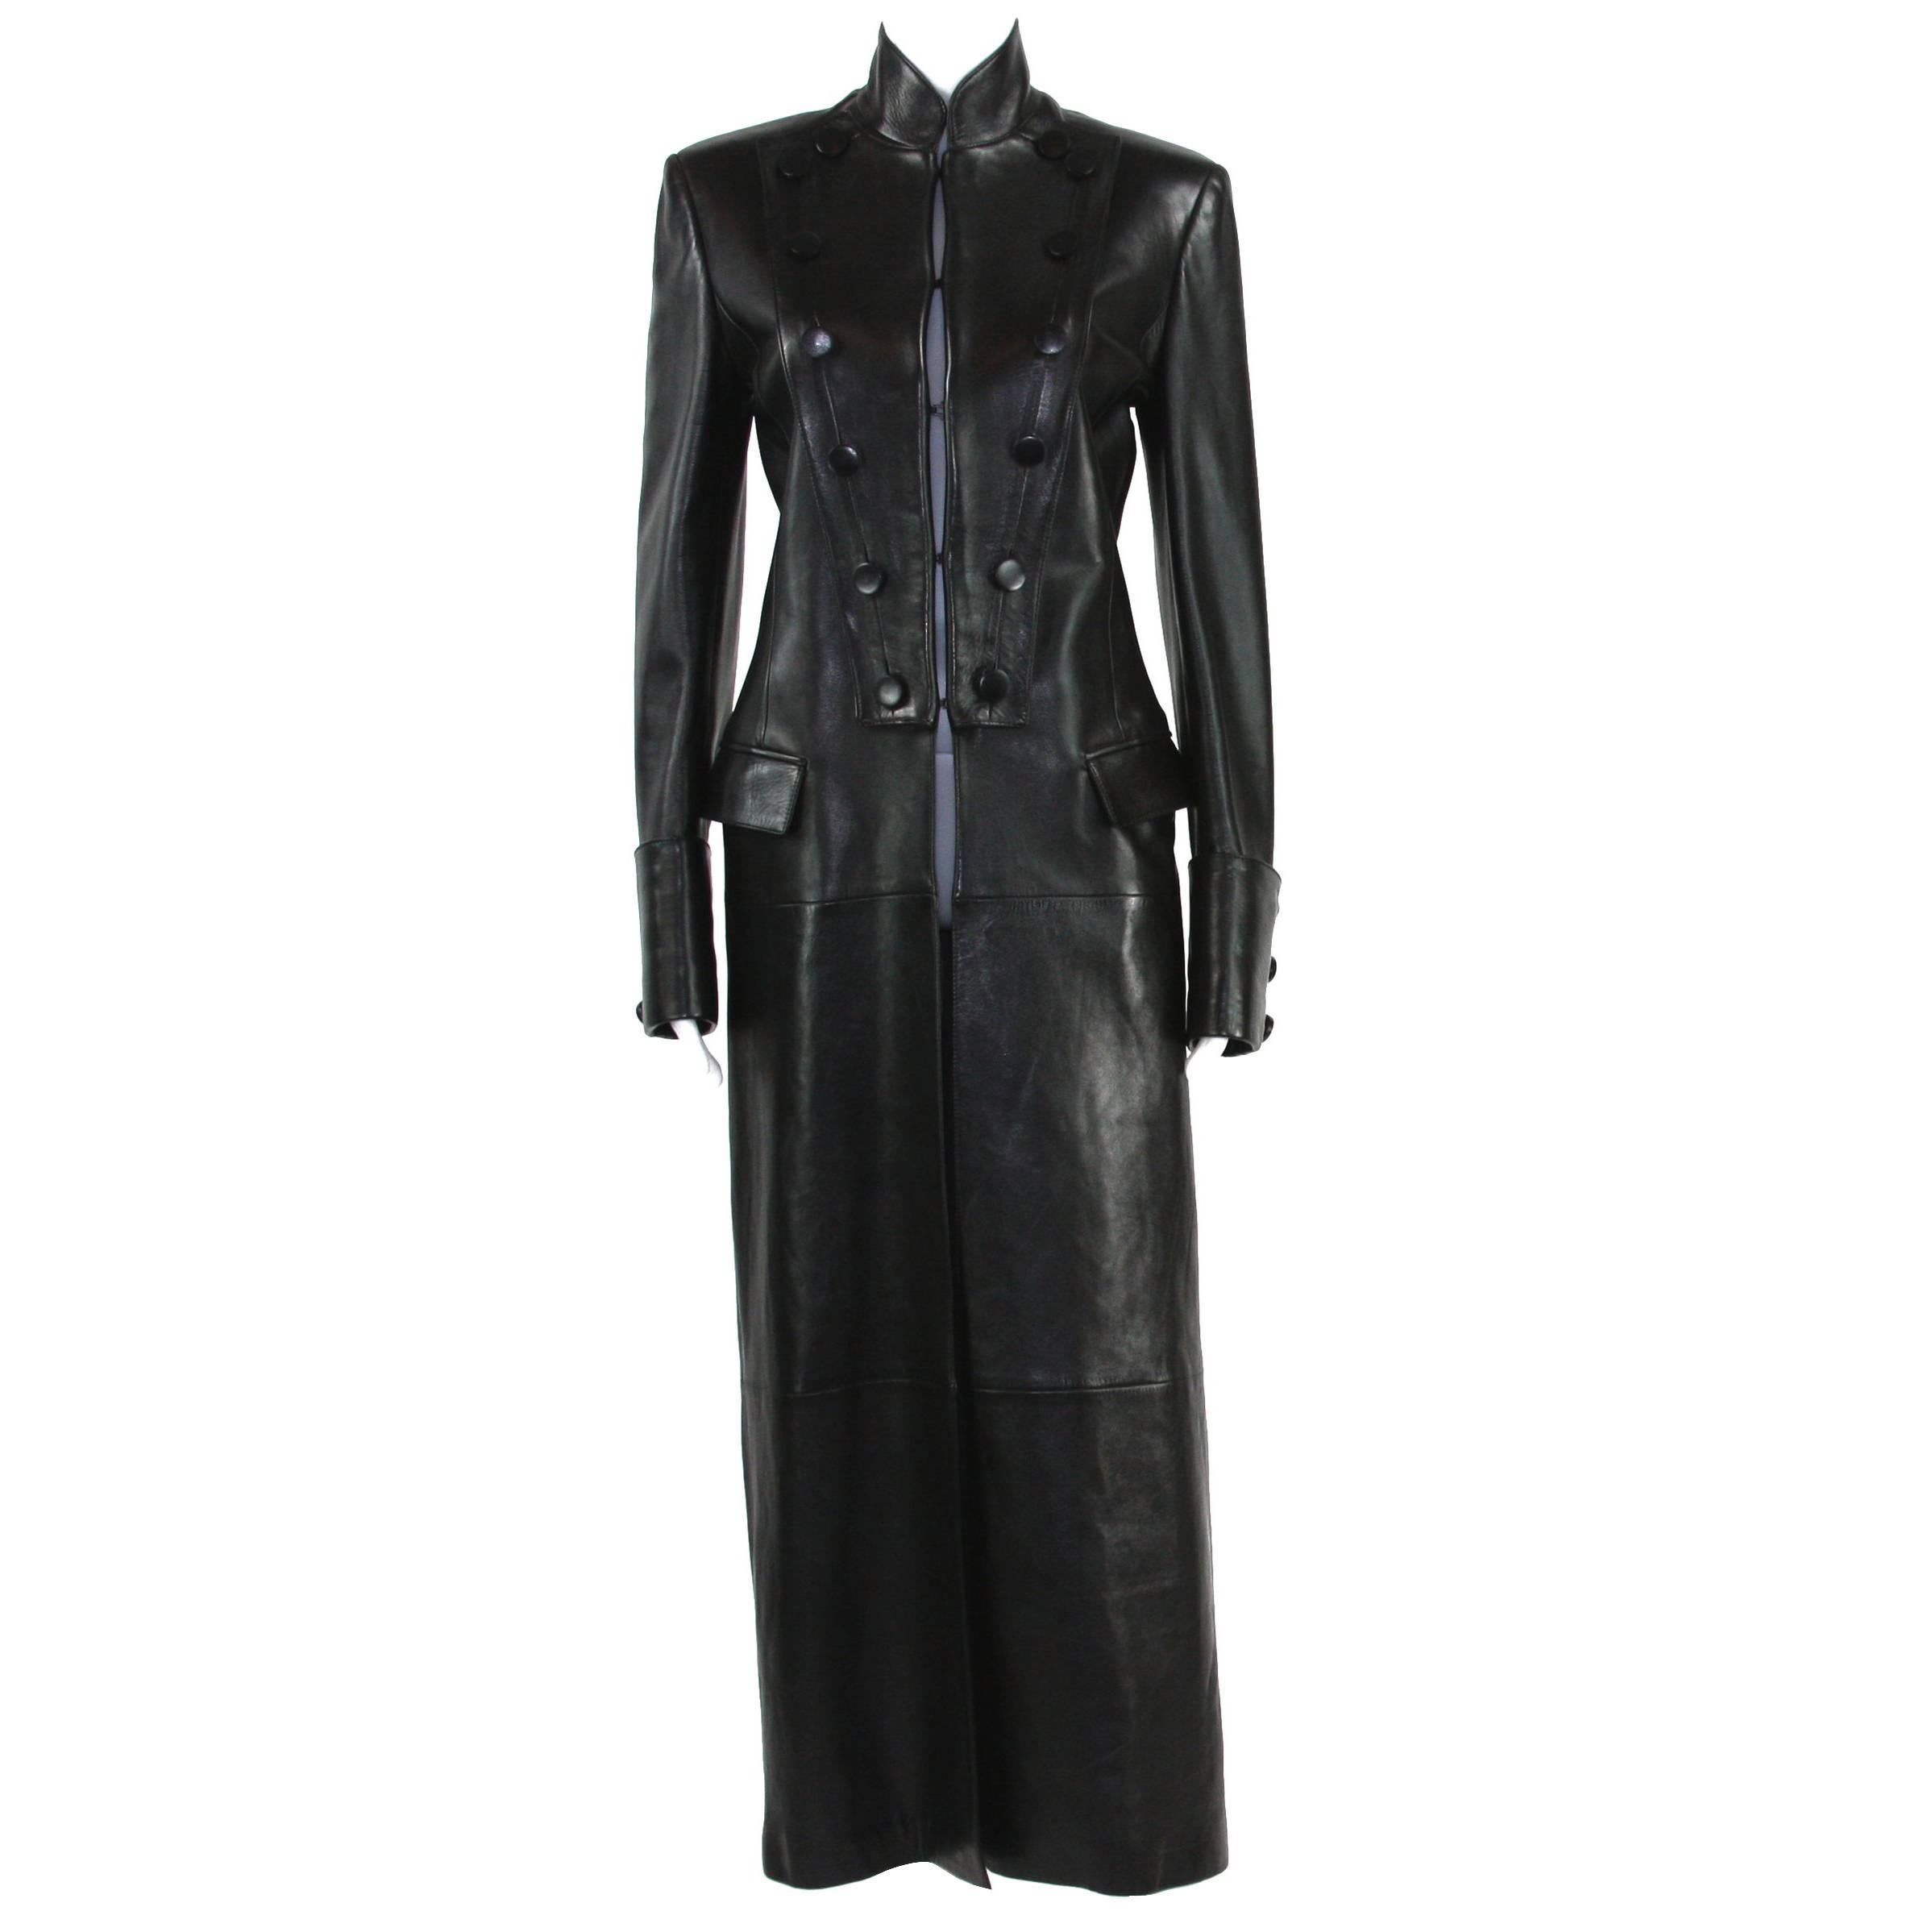 Tom Ford for Yves Saint Laurent F/W 2001 Black Leather Long Military Style Coat